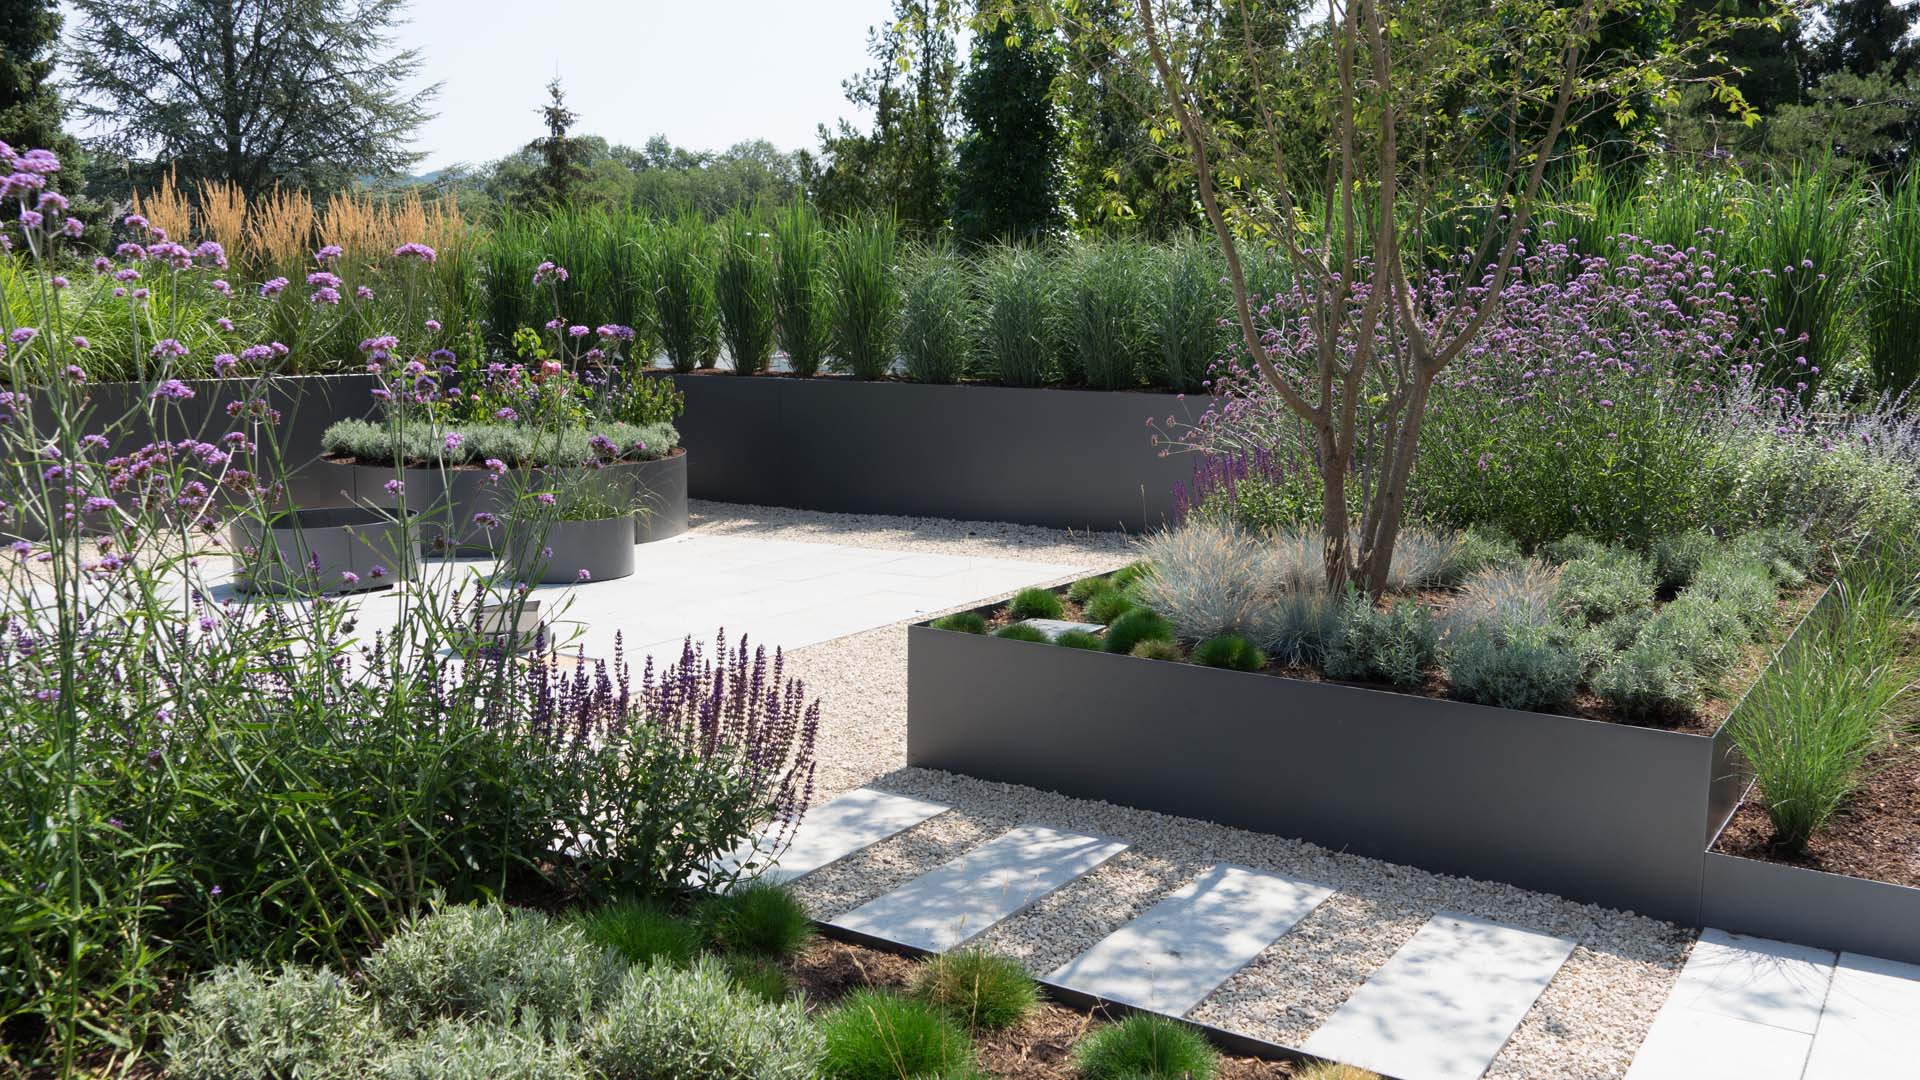 Spacious gravel garden features numerous raised beds filled with a variety of plants and trees, making it easier to maintain and keep tidy